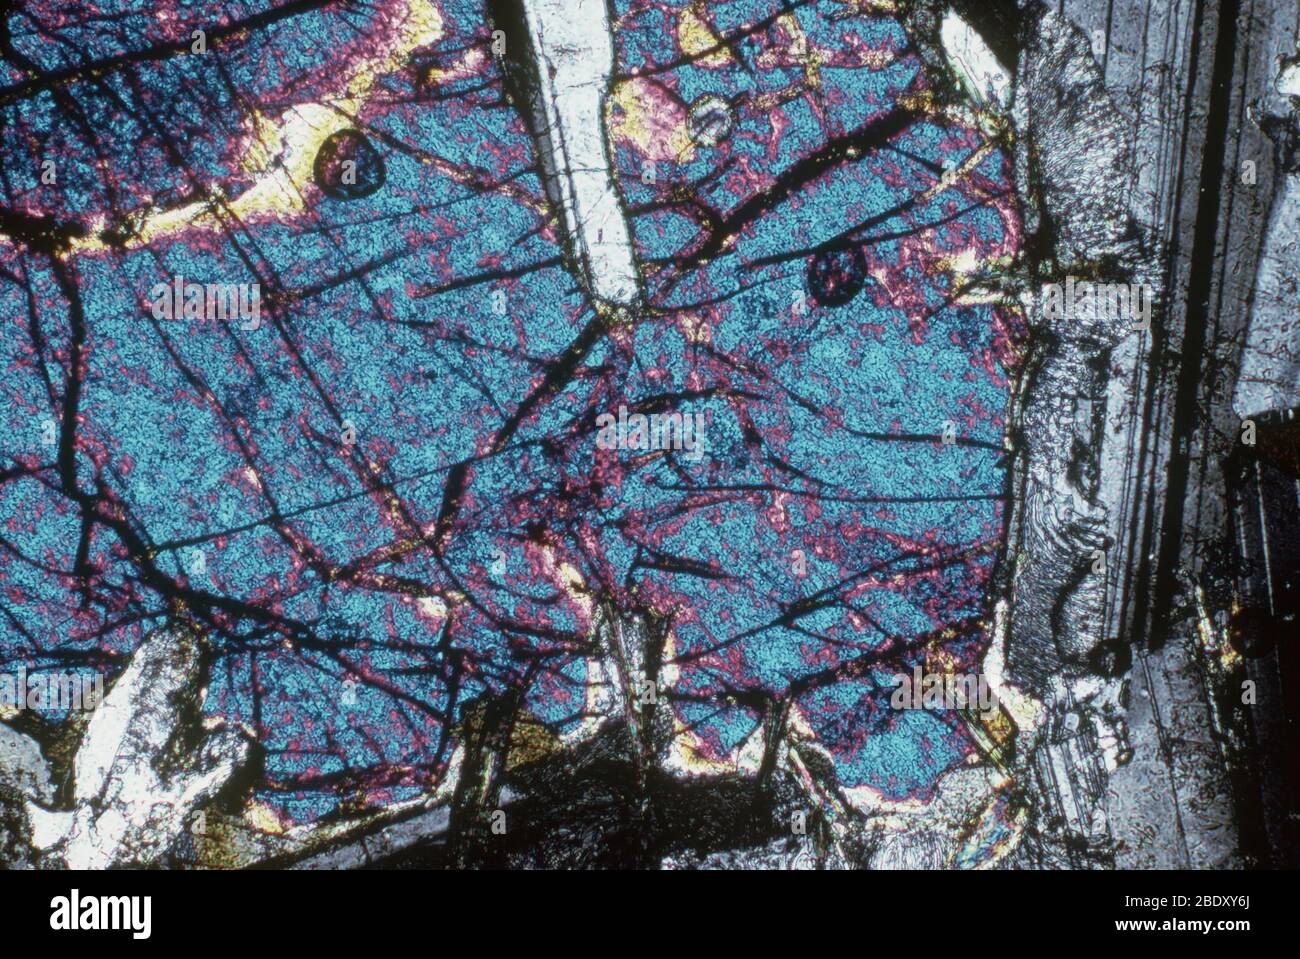 Olivine gabbro. Gabbro is a group of dark, course-grained intrusive mafic igneous rocks chemically equivalent to basalt. When large amounts of the mineral olivine (also known as peridot) are present, it is called olivine gabbro. Stock Photo